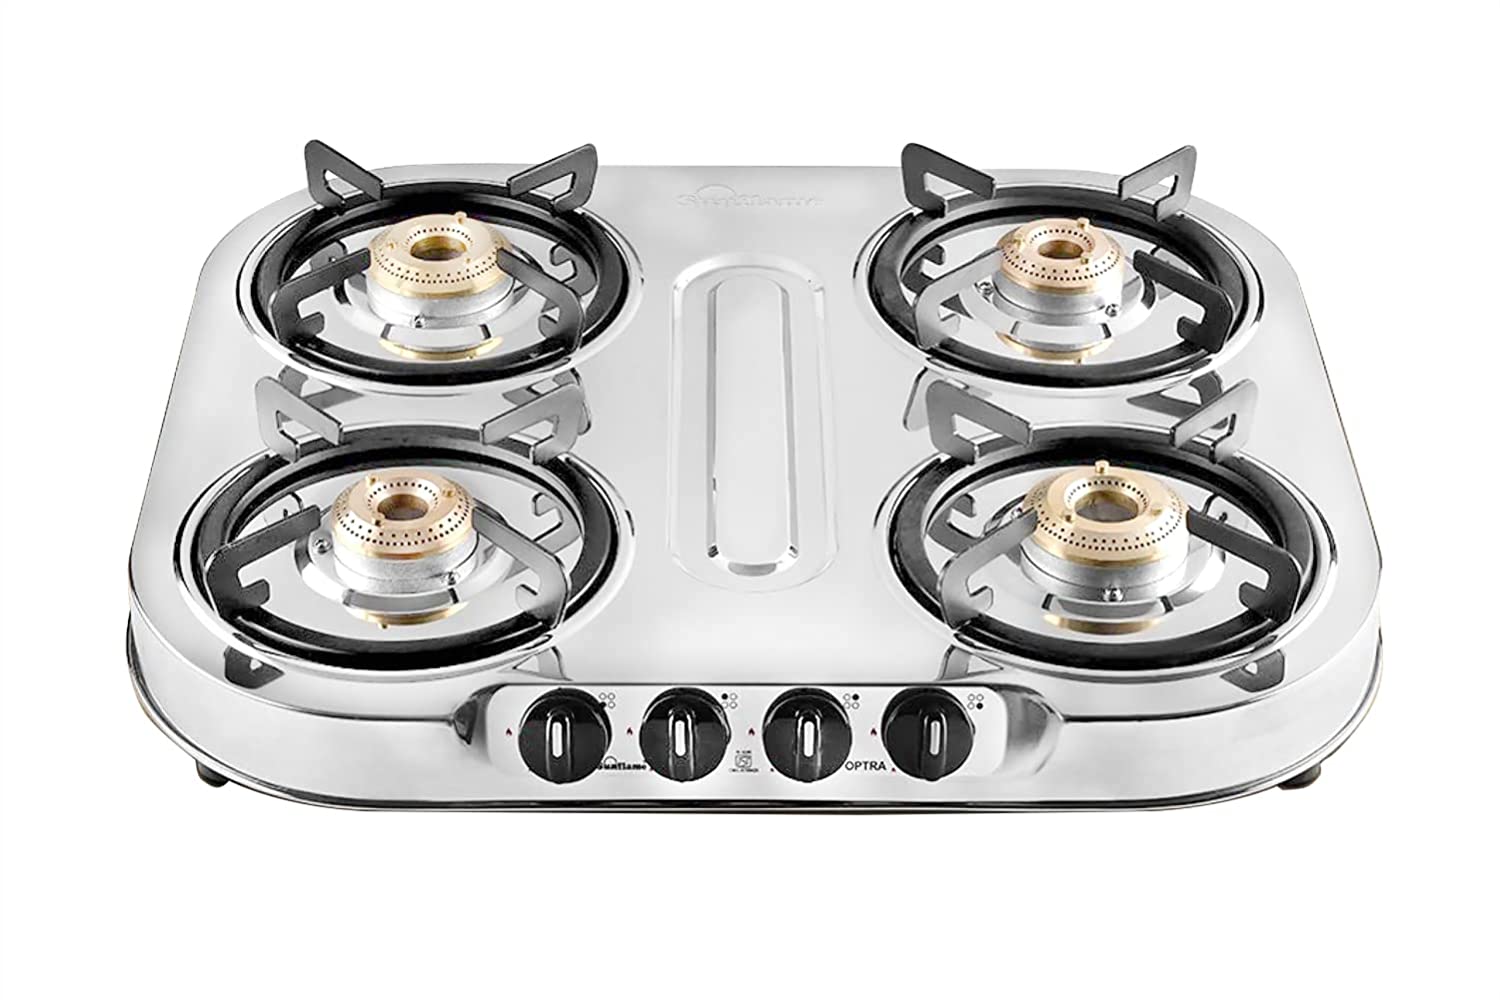 Sunflame gas stove 4 burner stainless steel price, review